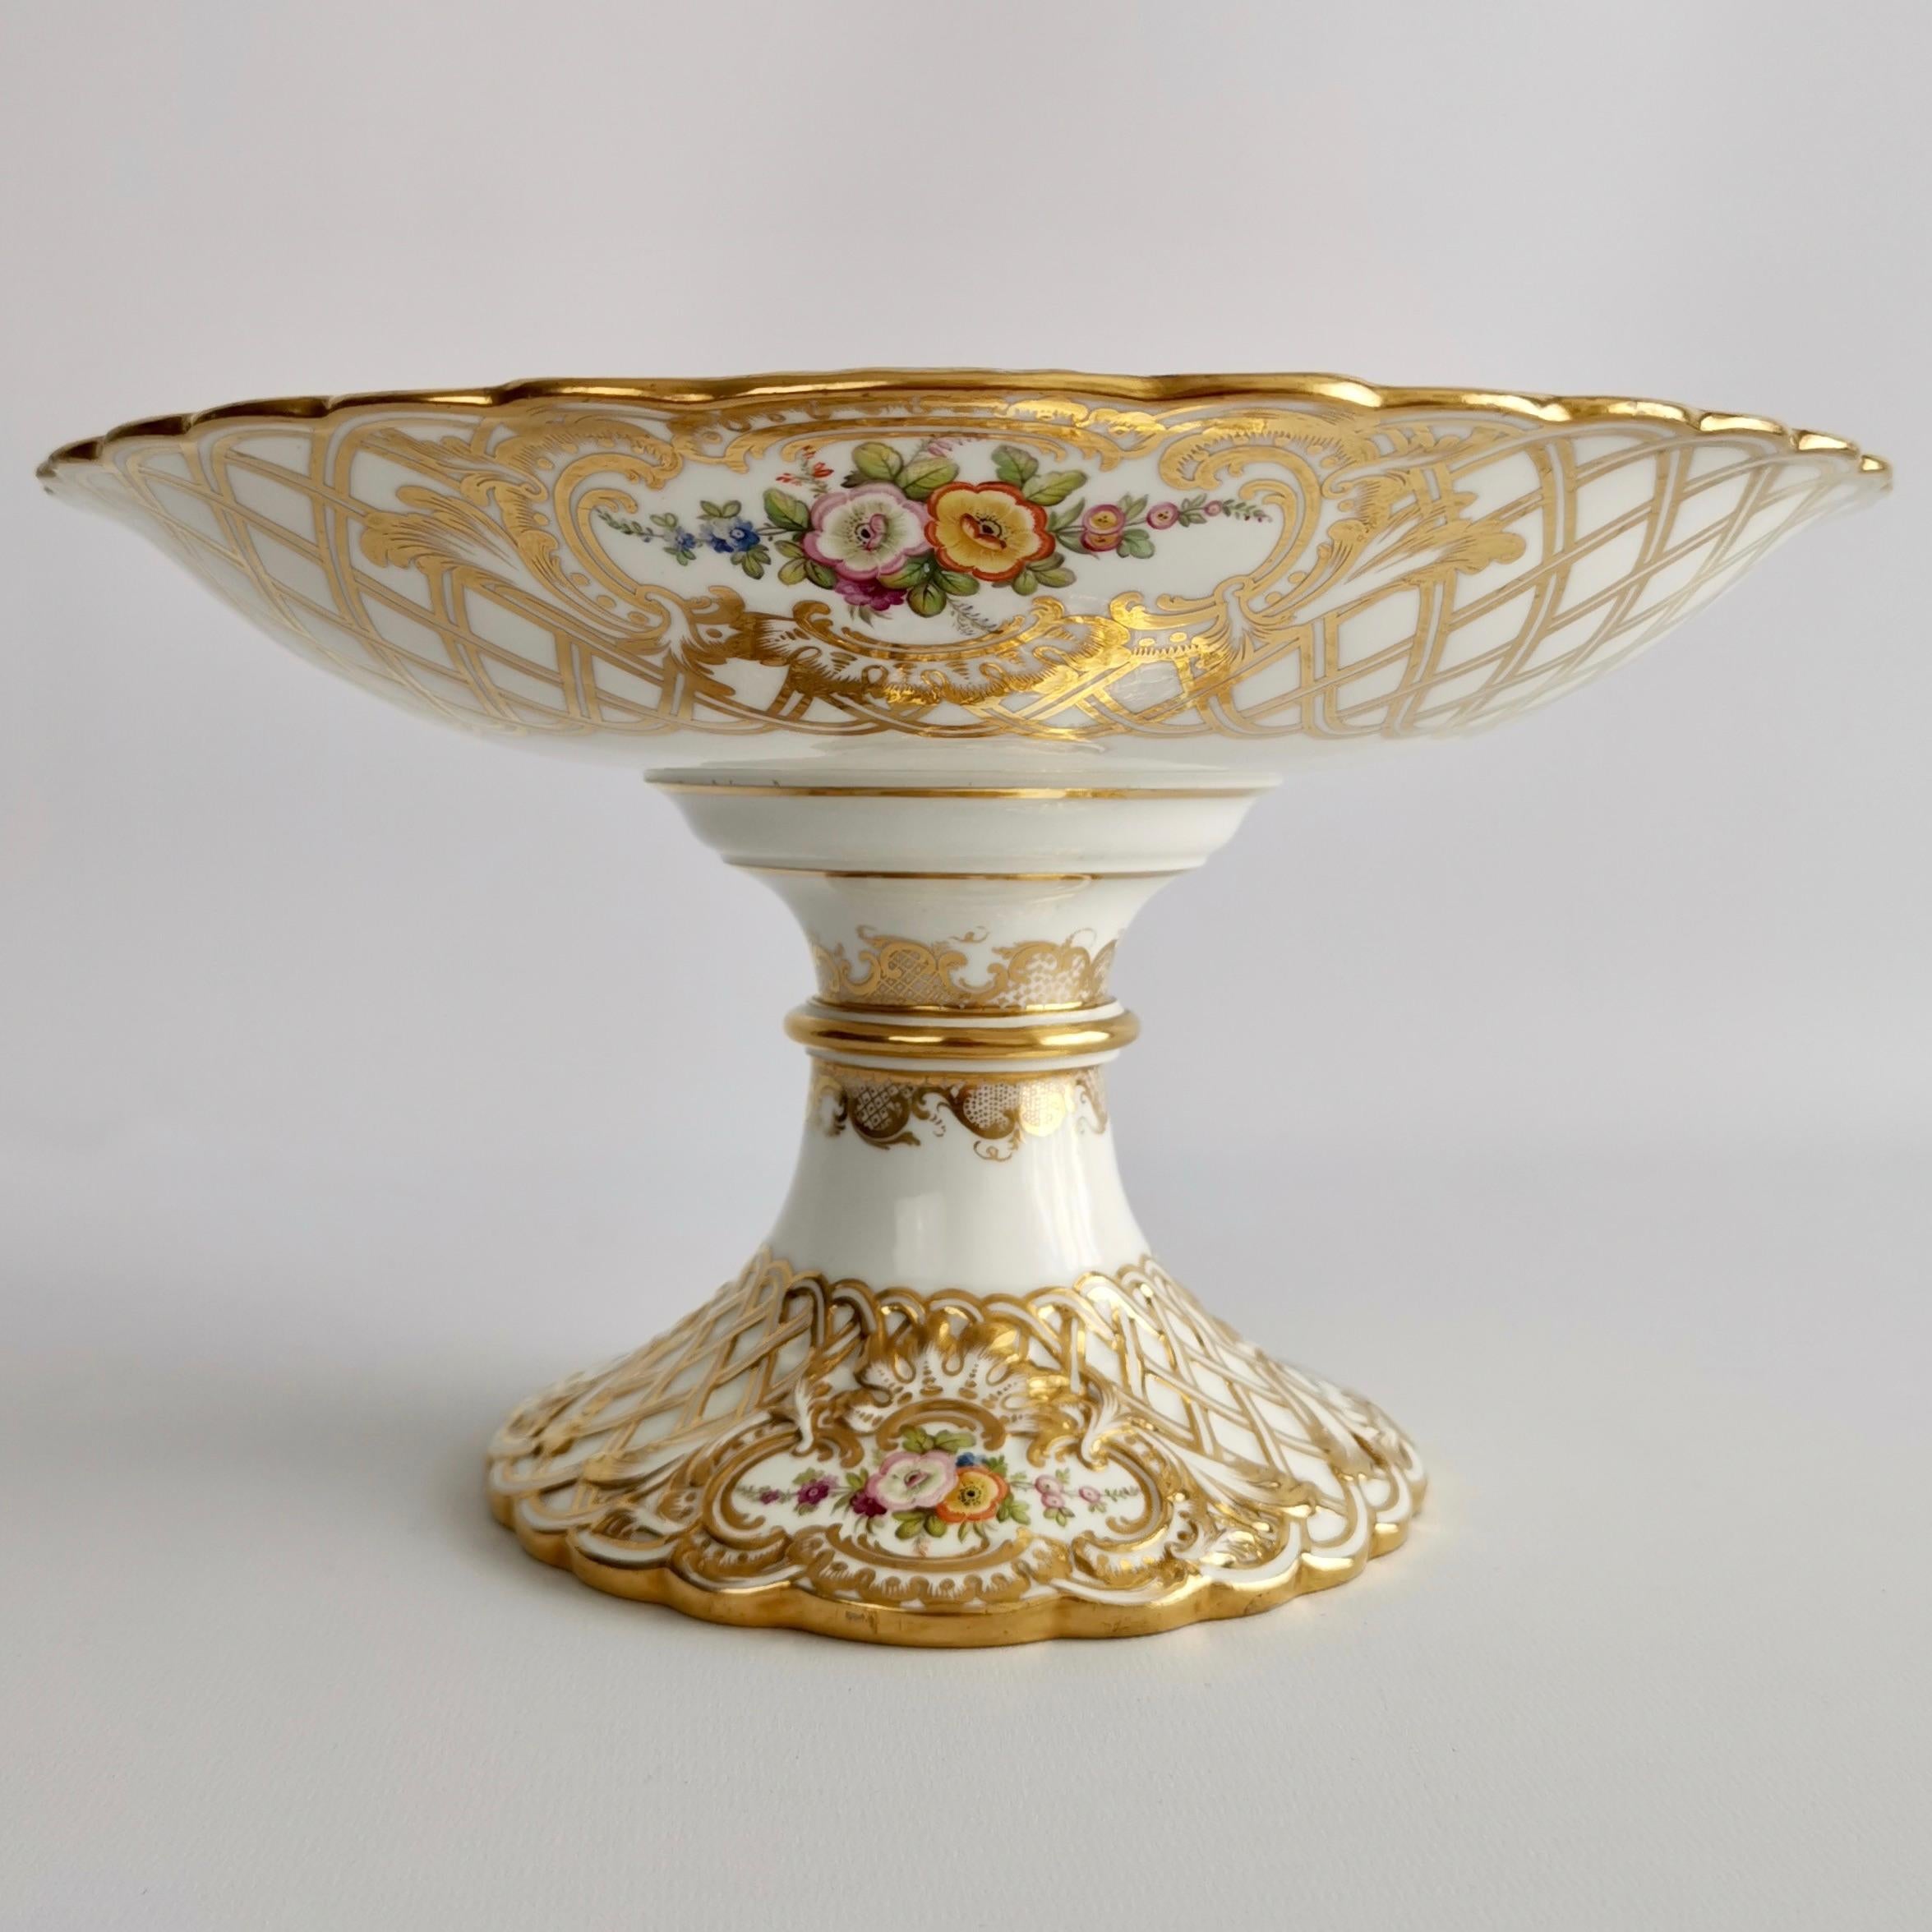 This is a stunning and rare part-dessert service made by Minton in 1841, which was the Rococo Revival era. It is beautifully moulded in the Newcastle Embossed shape and hand painted with flowers by Joseph Bancroft. The set consists of two high